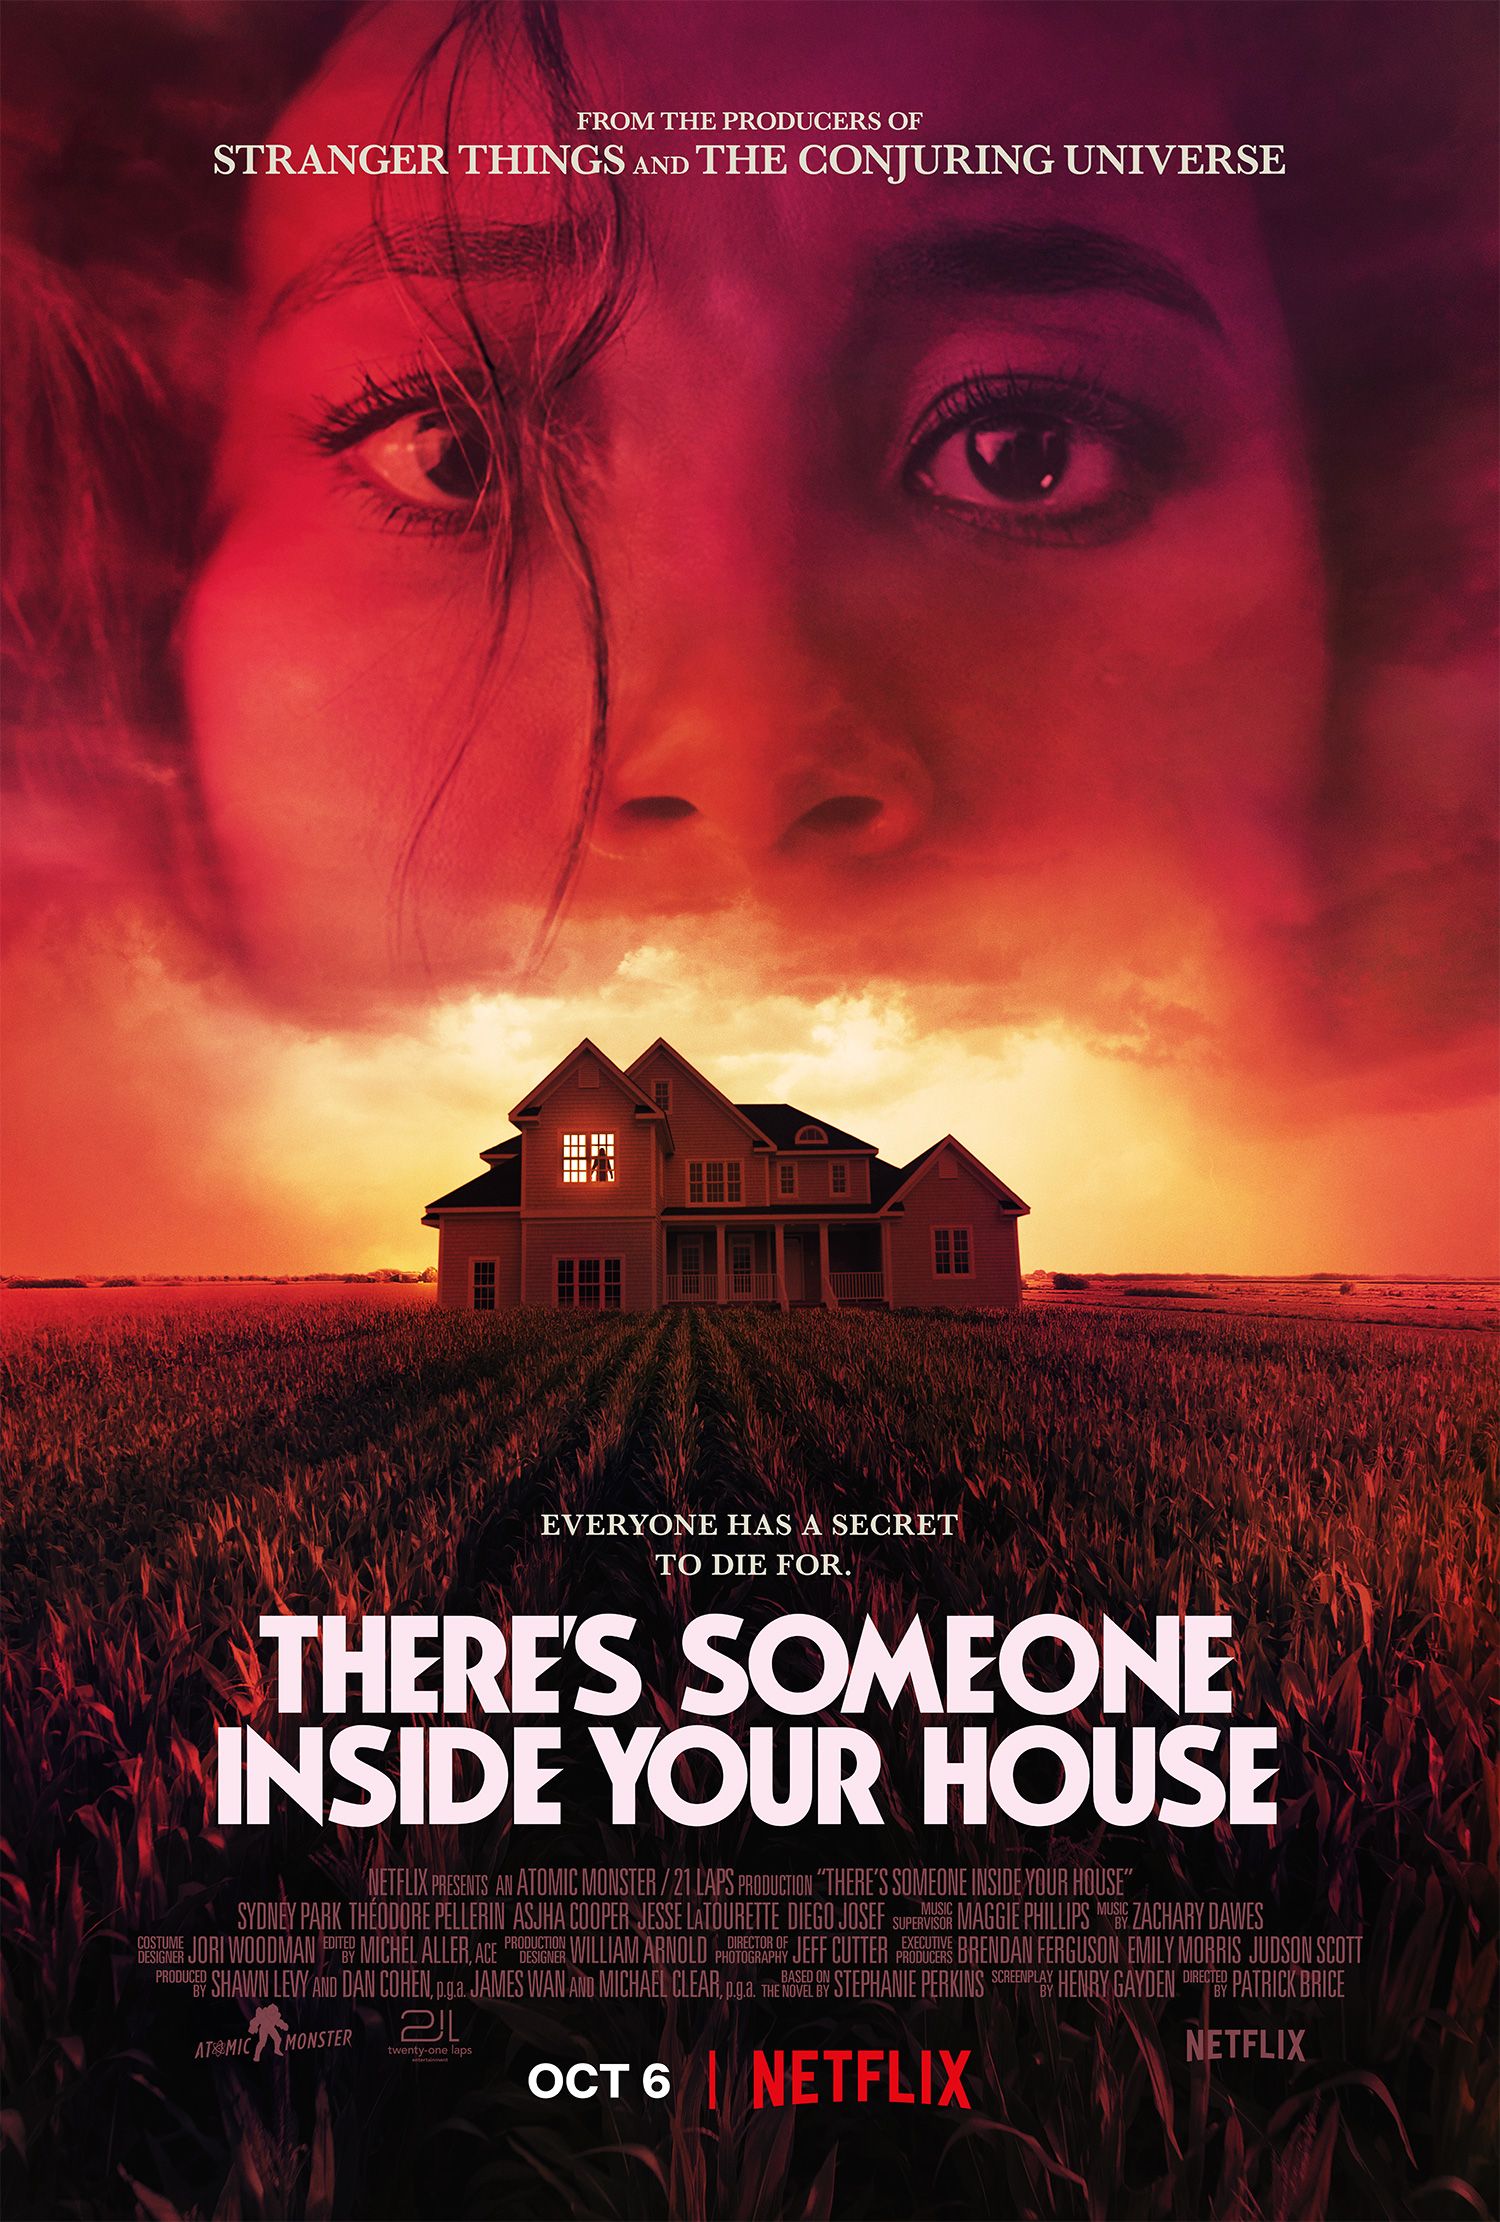 There’s Someone Inside Your House Trailer Teases YA Horror Novel Adaptation